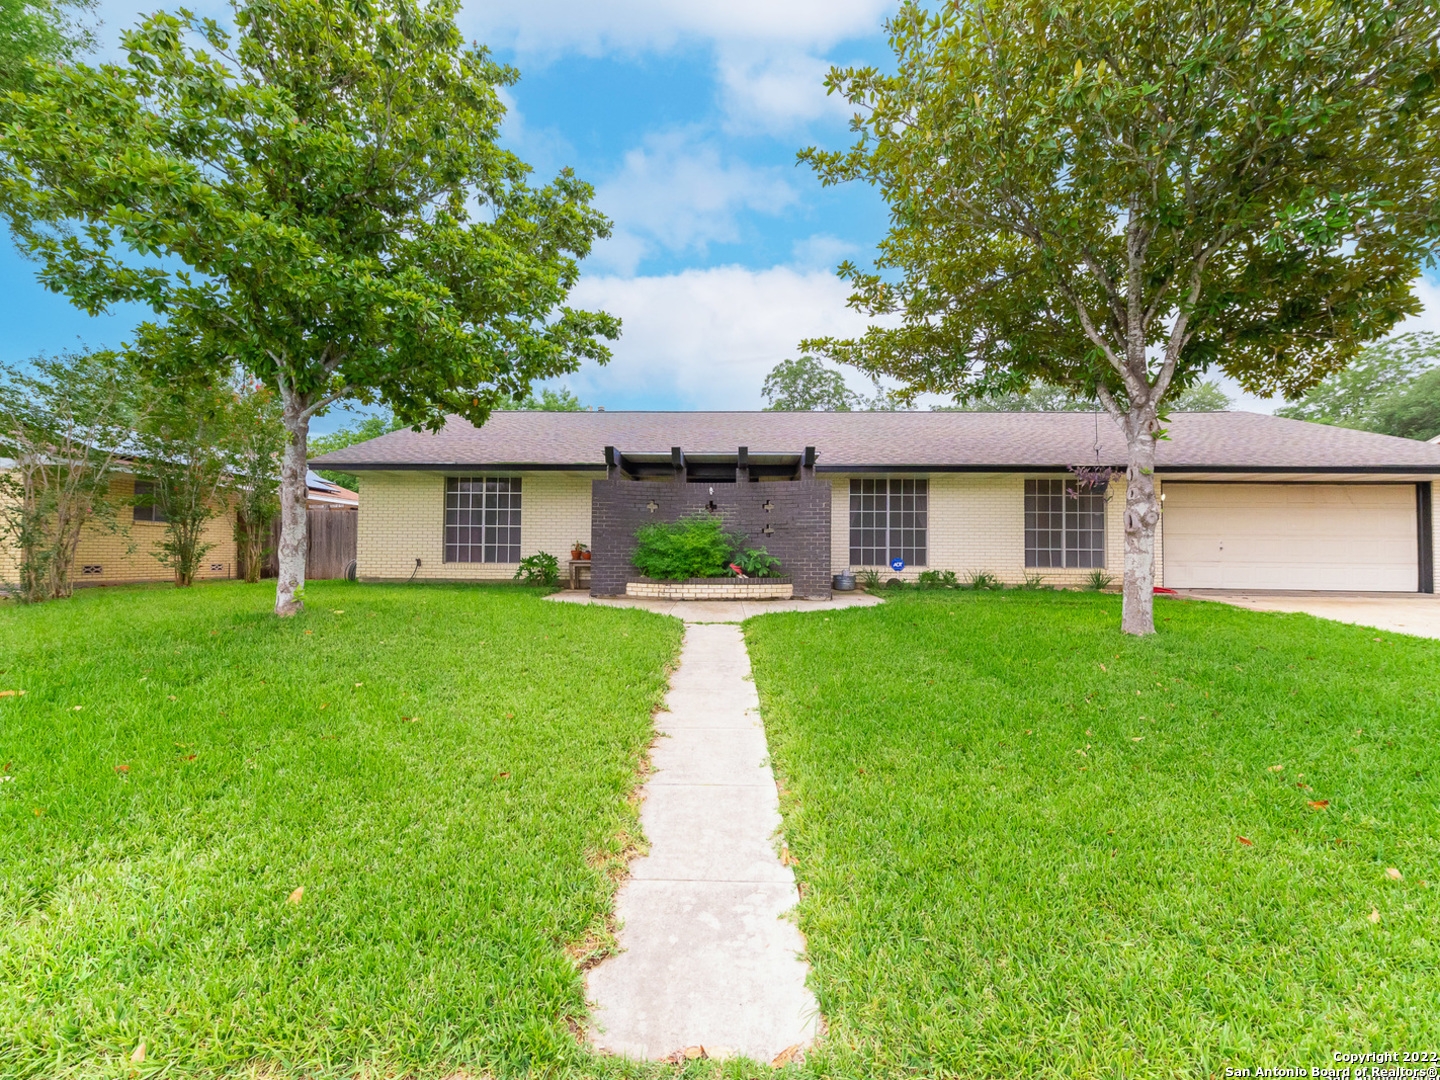 Remodeled mid century charmer in Macarthur Terrace!  This 4/3 single story home with a pool is move in ready!!  Location location - in the heart of central San Antonio, you will be close to the airport, fine dining, and great shopping.  Great school district, and walking distance to all schools.  This home features an open floor plan and is very spacious.